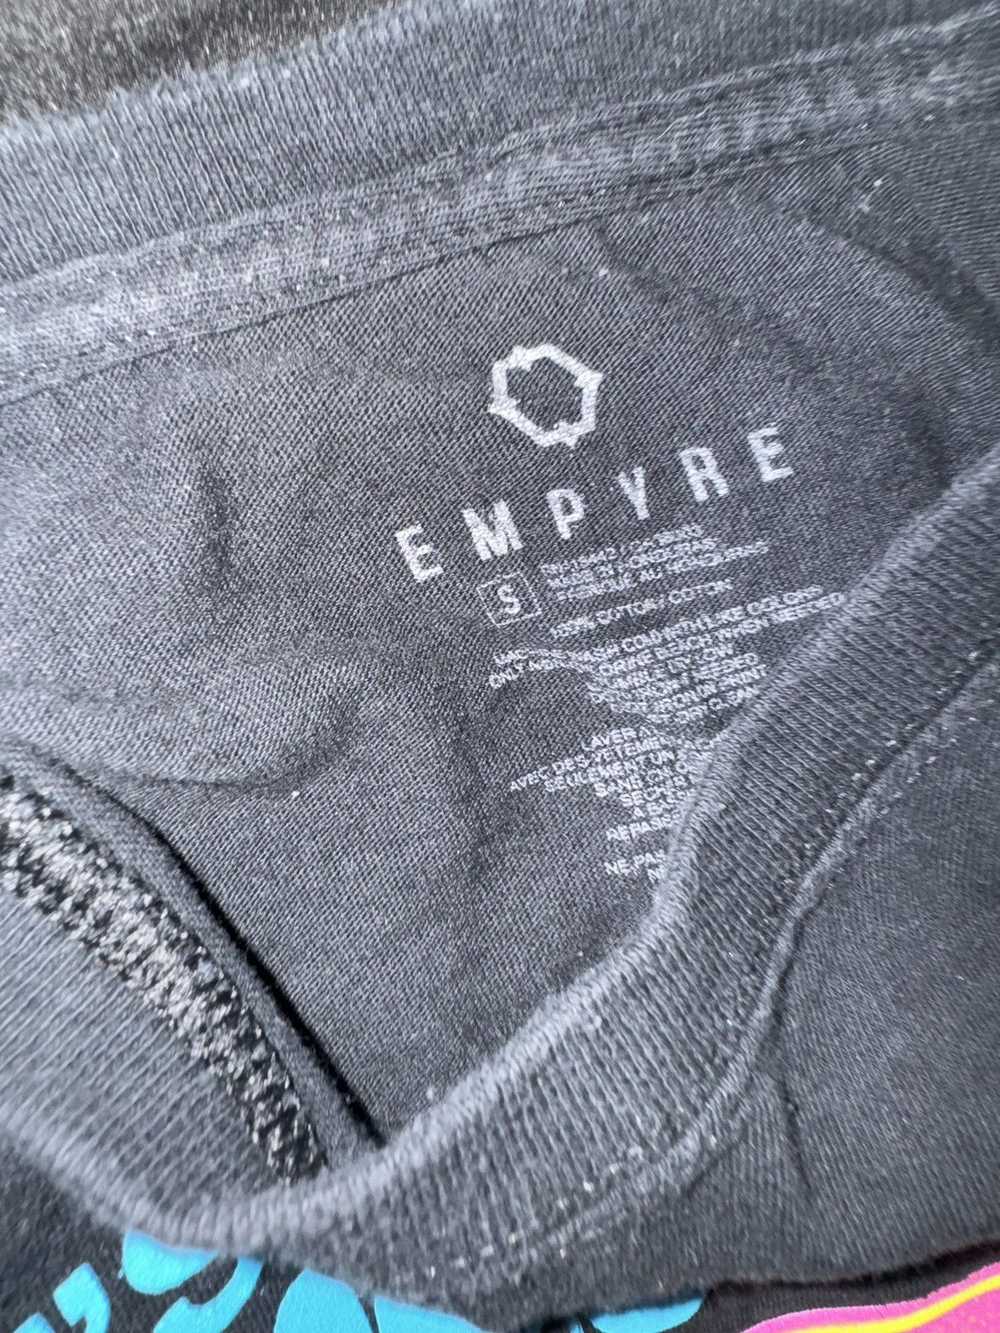 Empyre Graphic tee - image 3